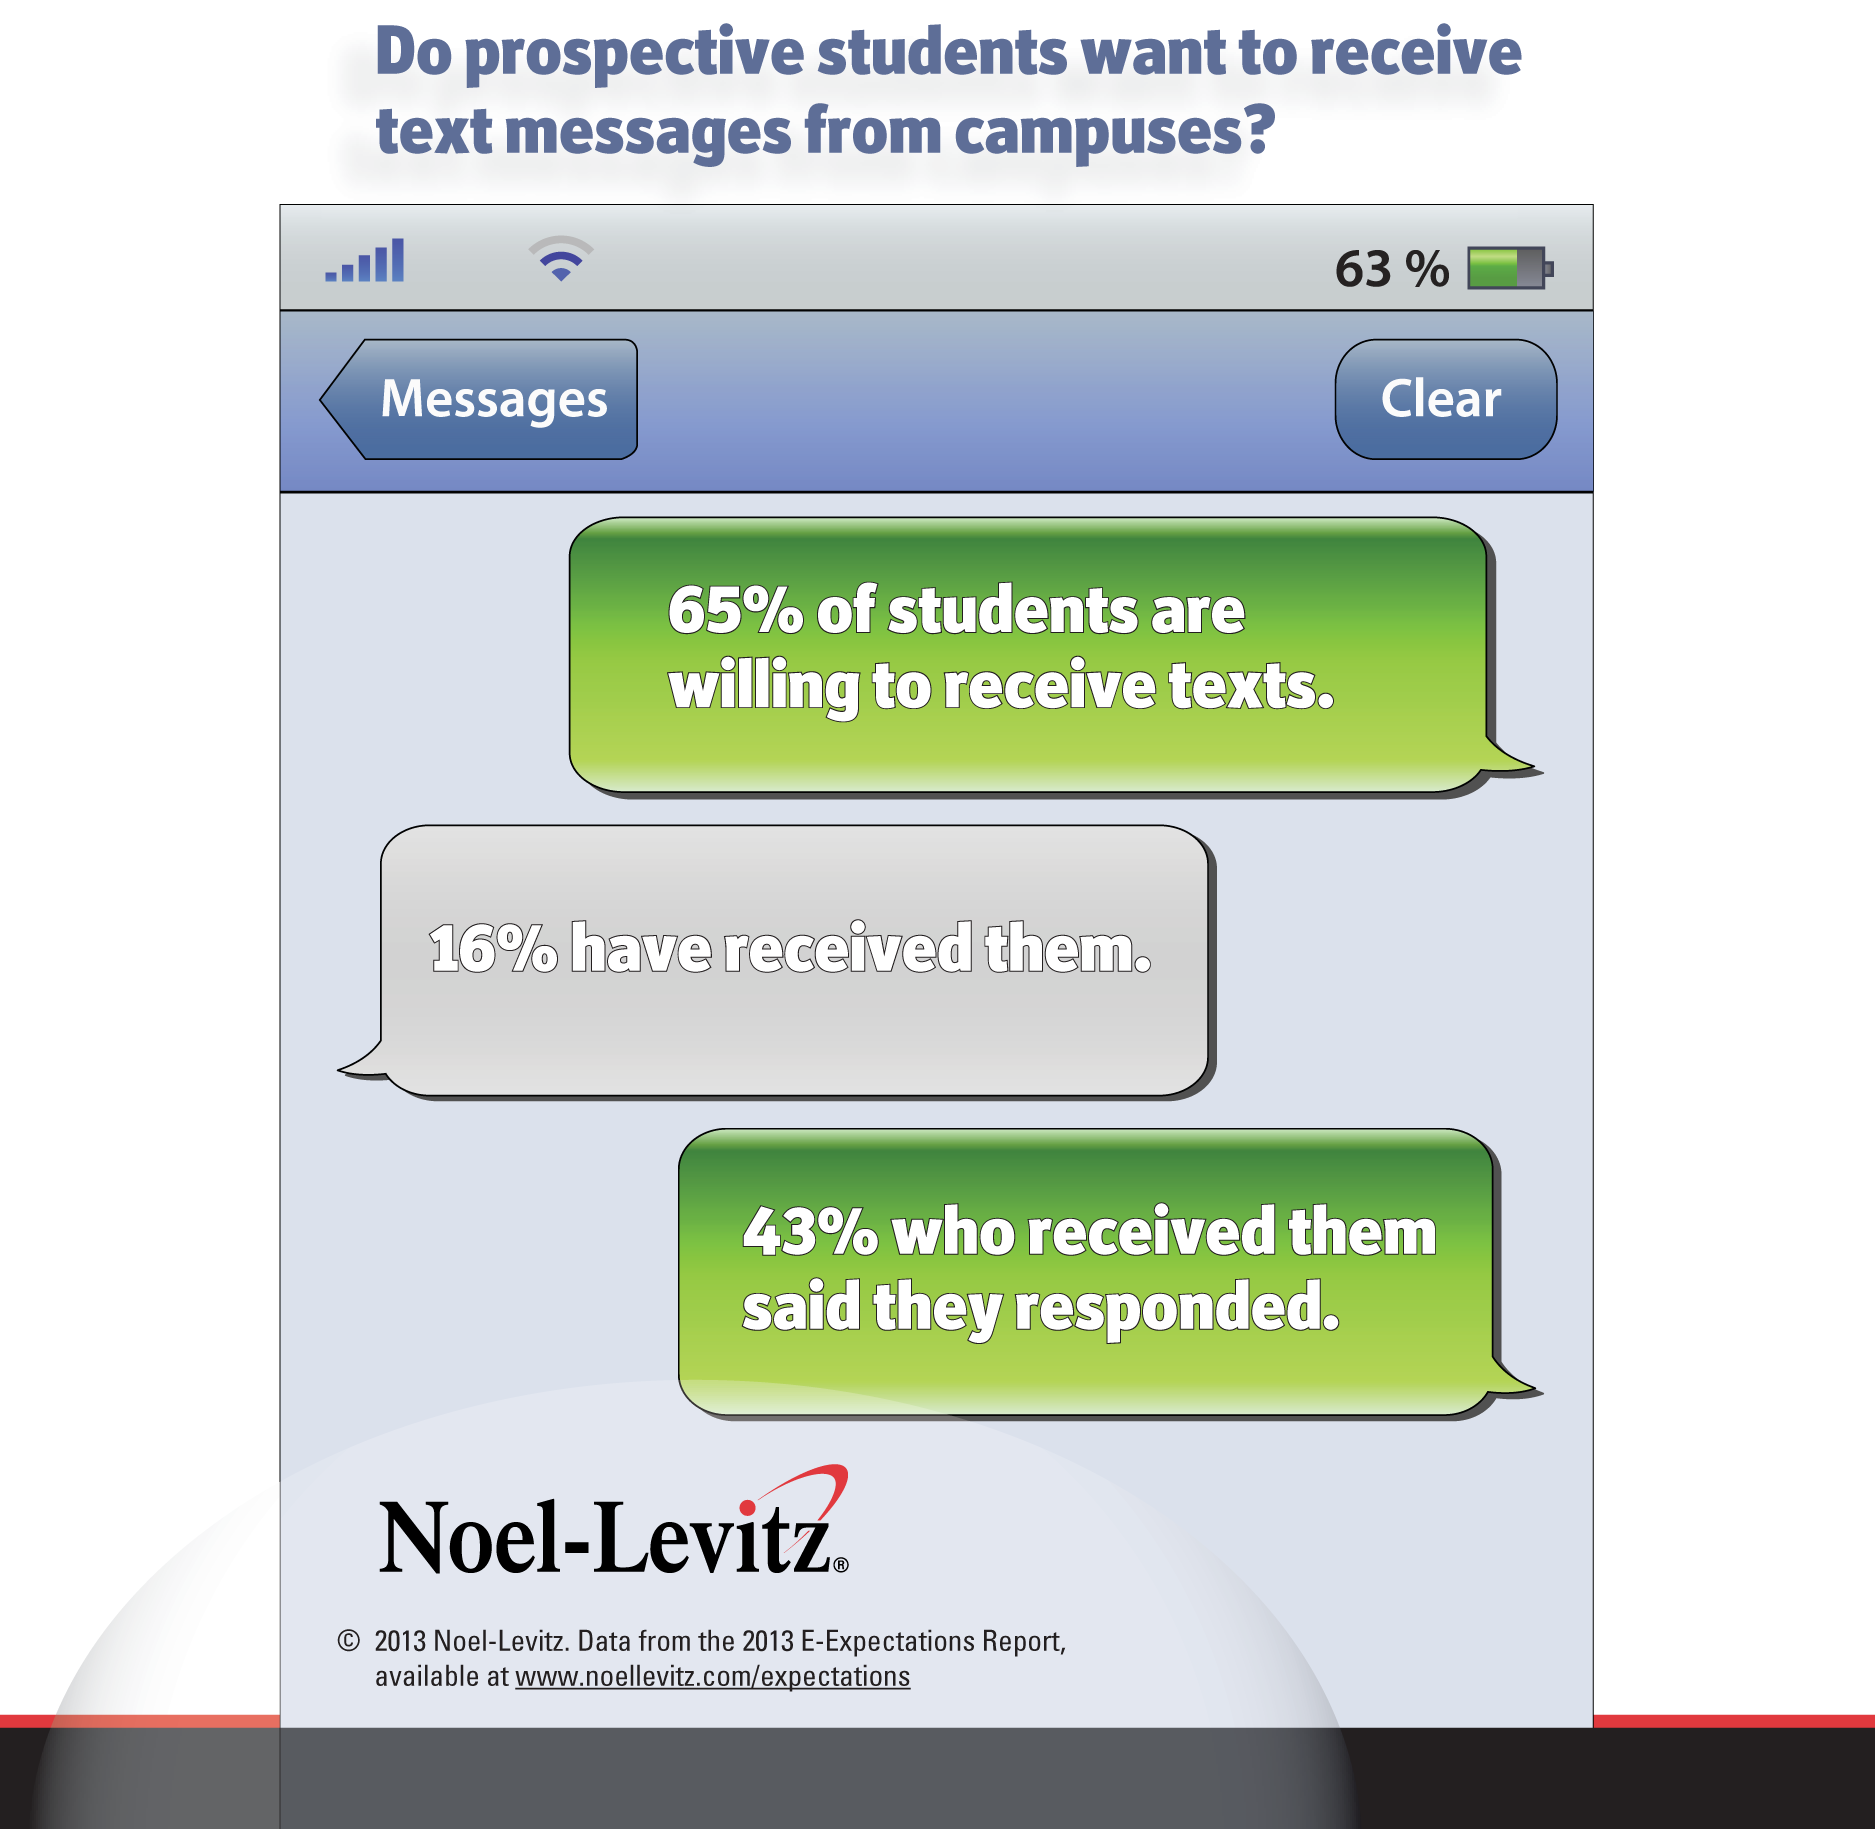 Two-thirds of students are willing to receive text messages, yet fewer than one in five reported receiving one from a campus.